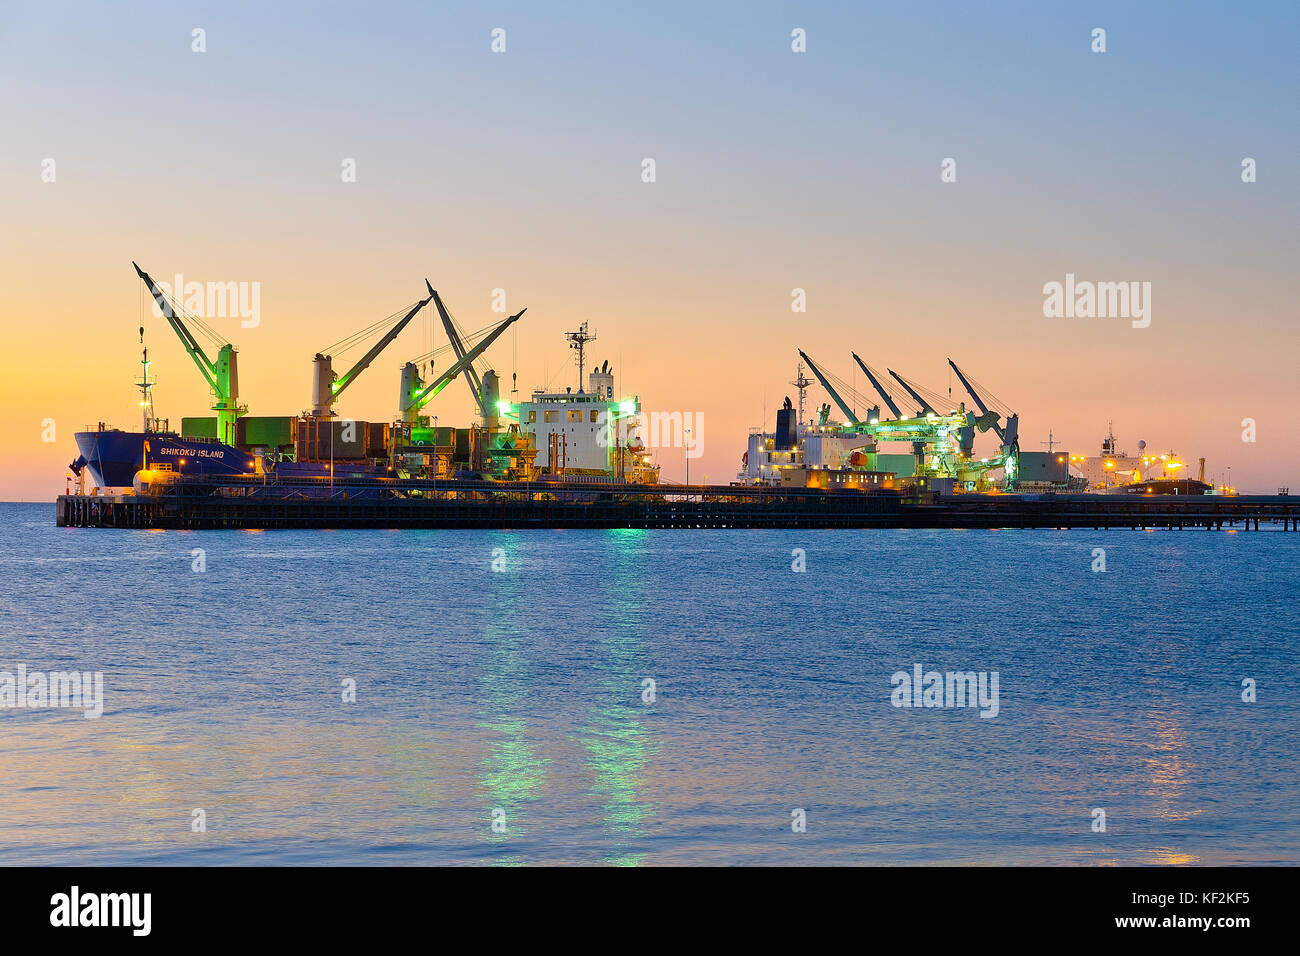 Ocean going containers ships load freight at wharf in the evening. Kwinana Industrial Estate, Rockingham Western Australia Stock Photo